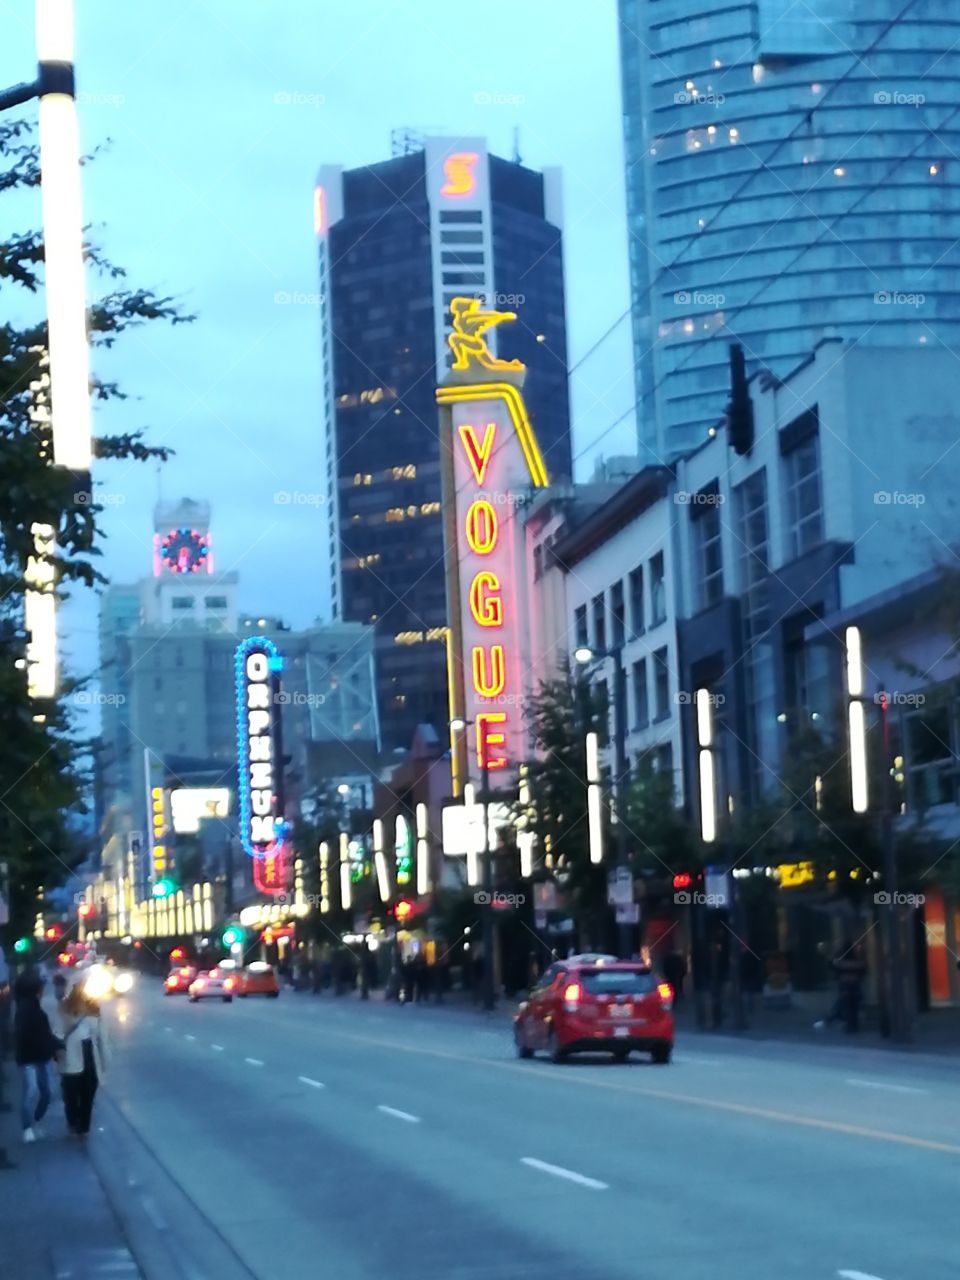 a nice picture of the vouge in Vancouver